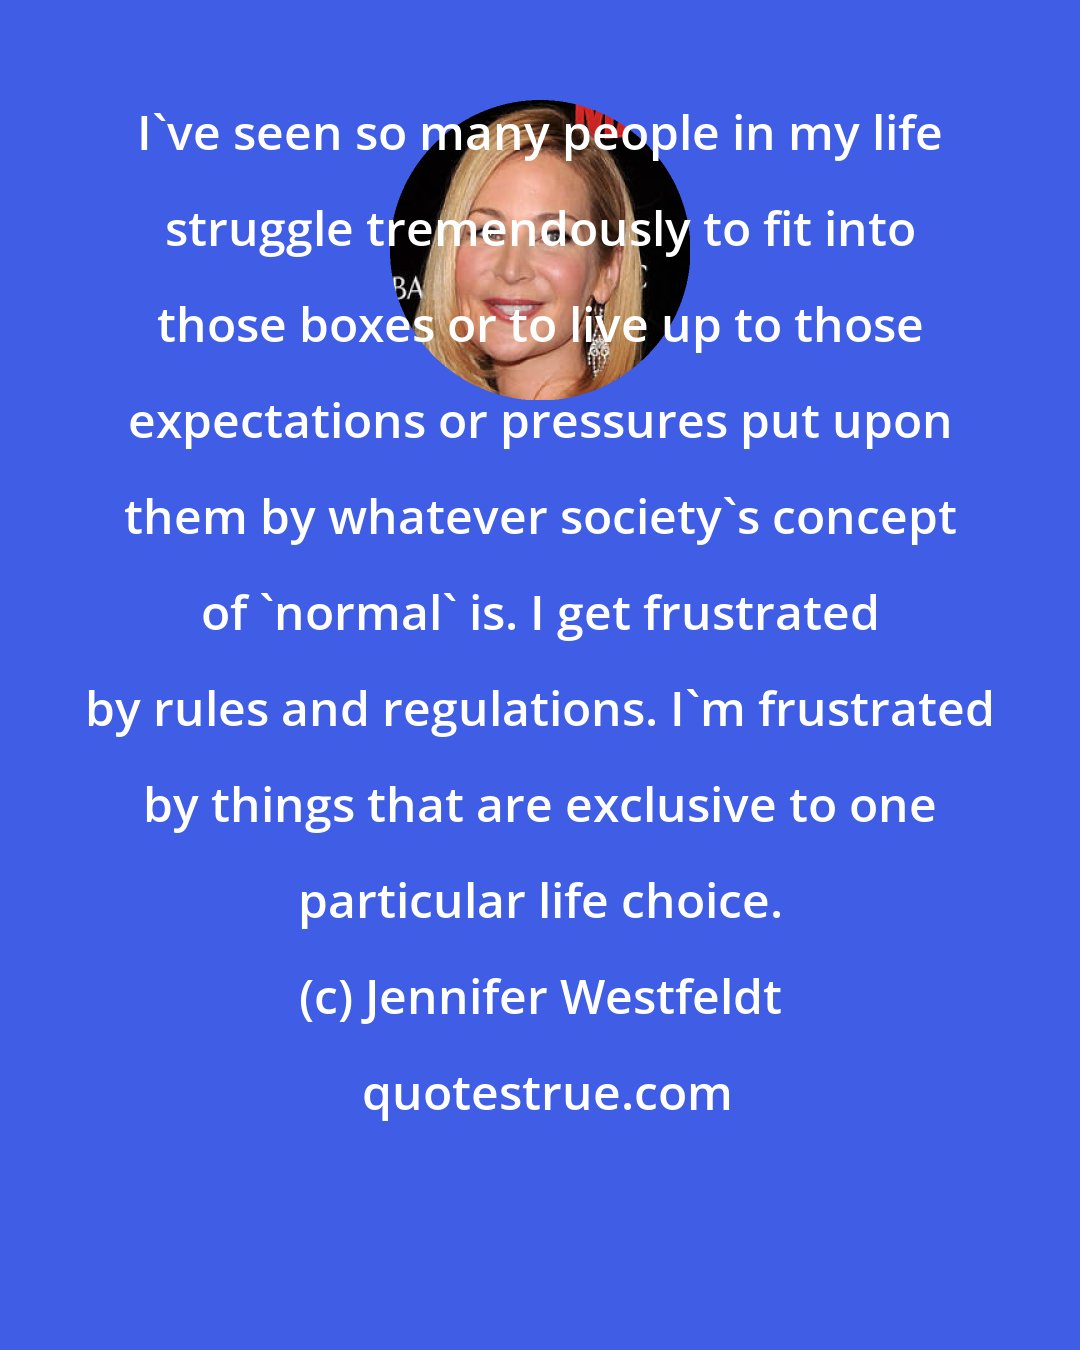 Jennifer Westfeldt: I've seen so many people in my life struggle tremendously to fit into those boxes or to live up to those expectations or pressures put upon them by whatever society's concept of 'normal' is. I get frustrated by rules and regulations. I'm frustrated by things that are exclusive to one particular life choice.